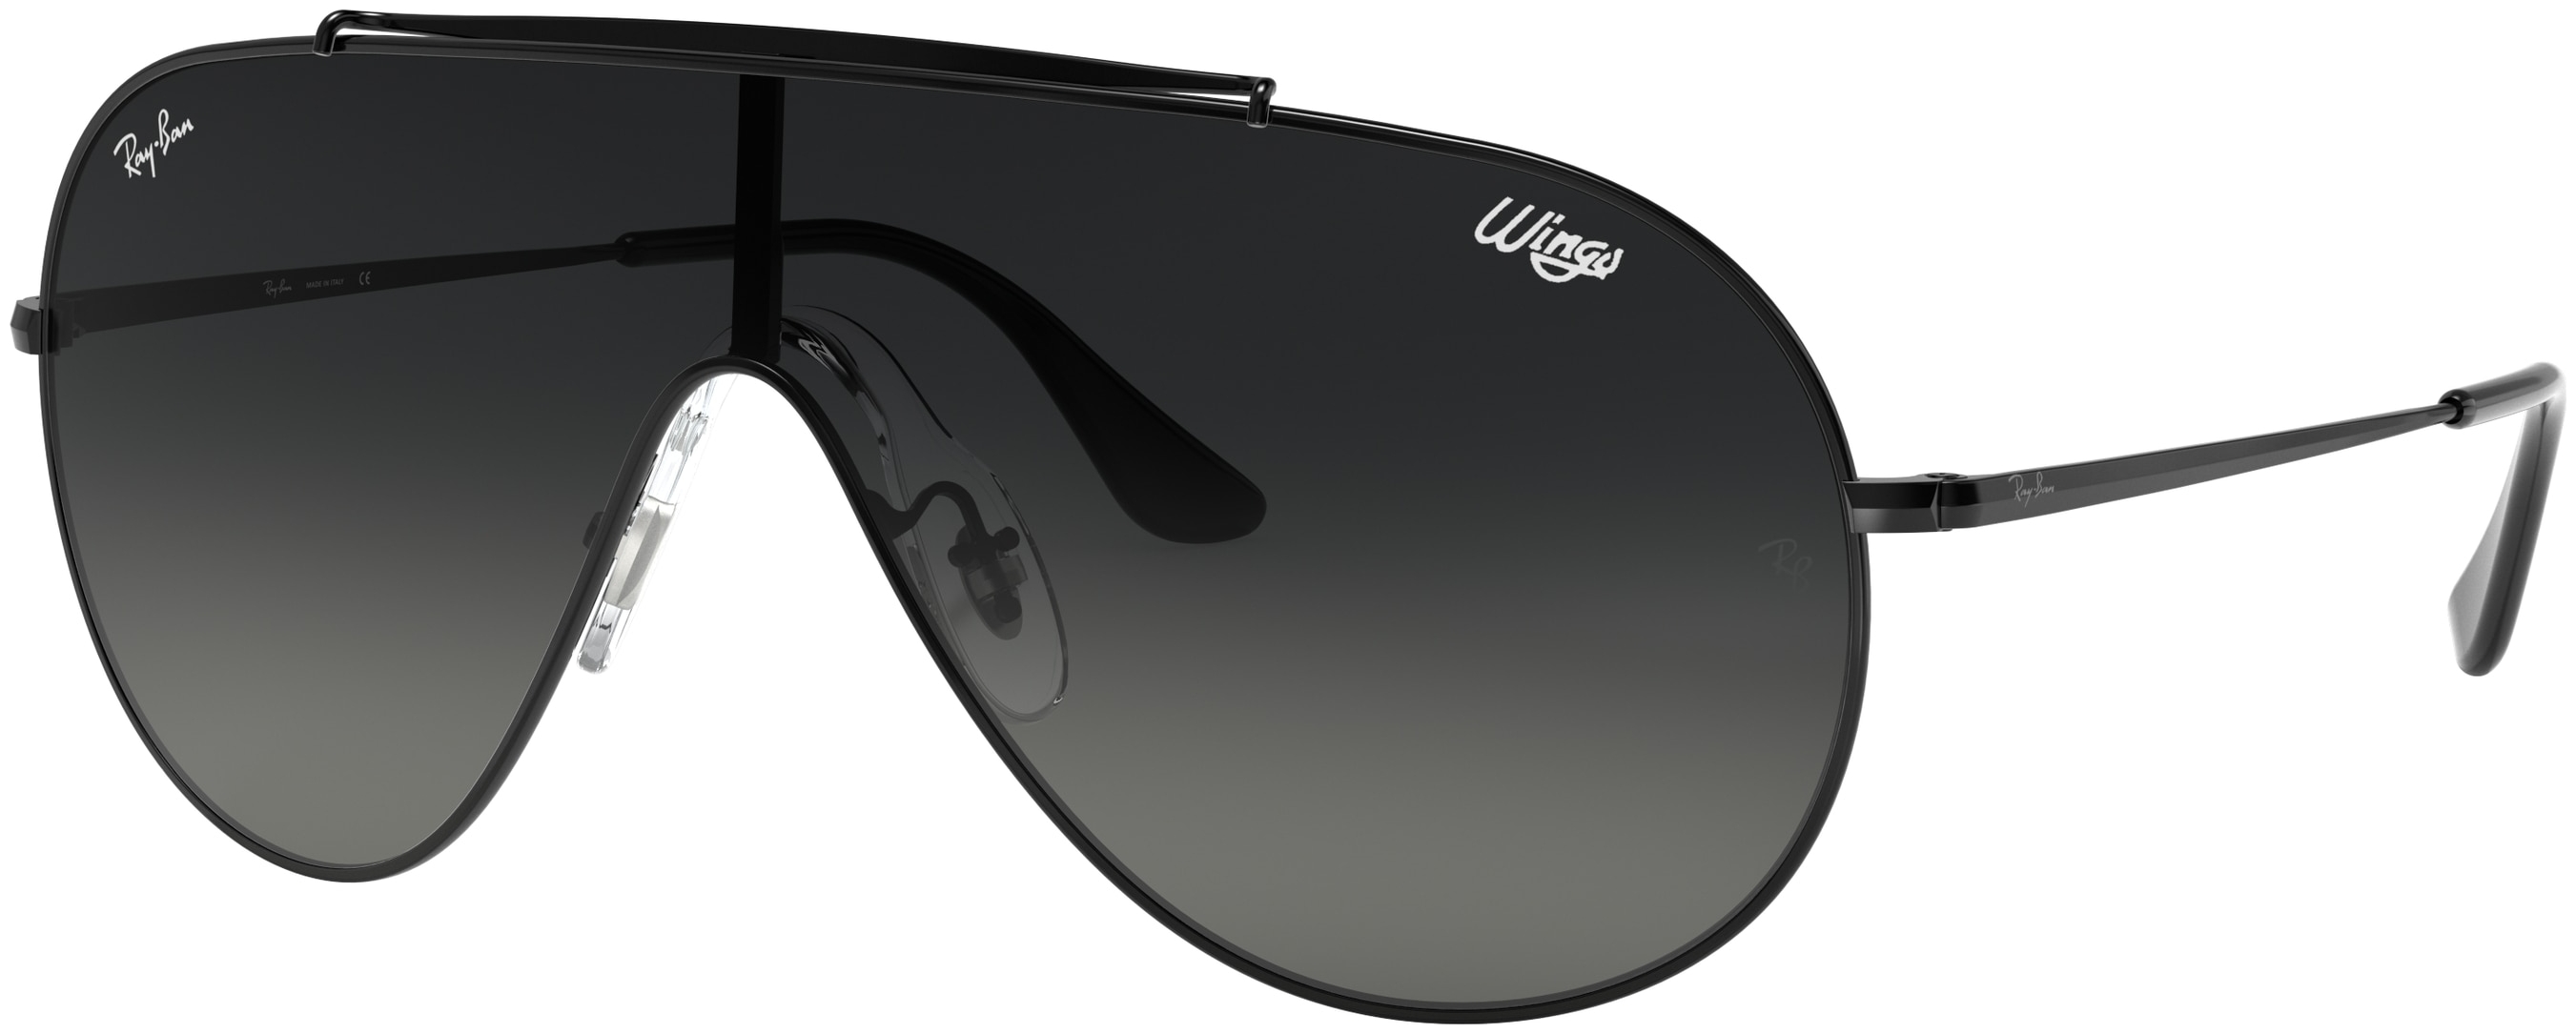  Ray-Ban  RB3597 002/11 WINGS